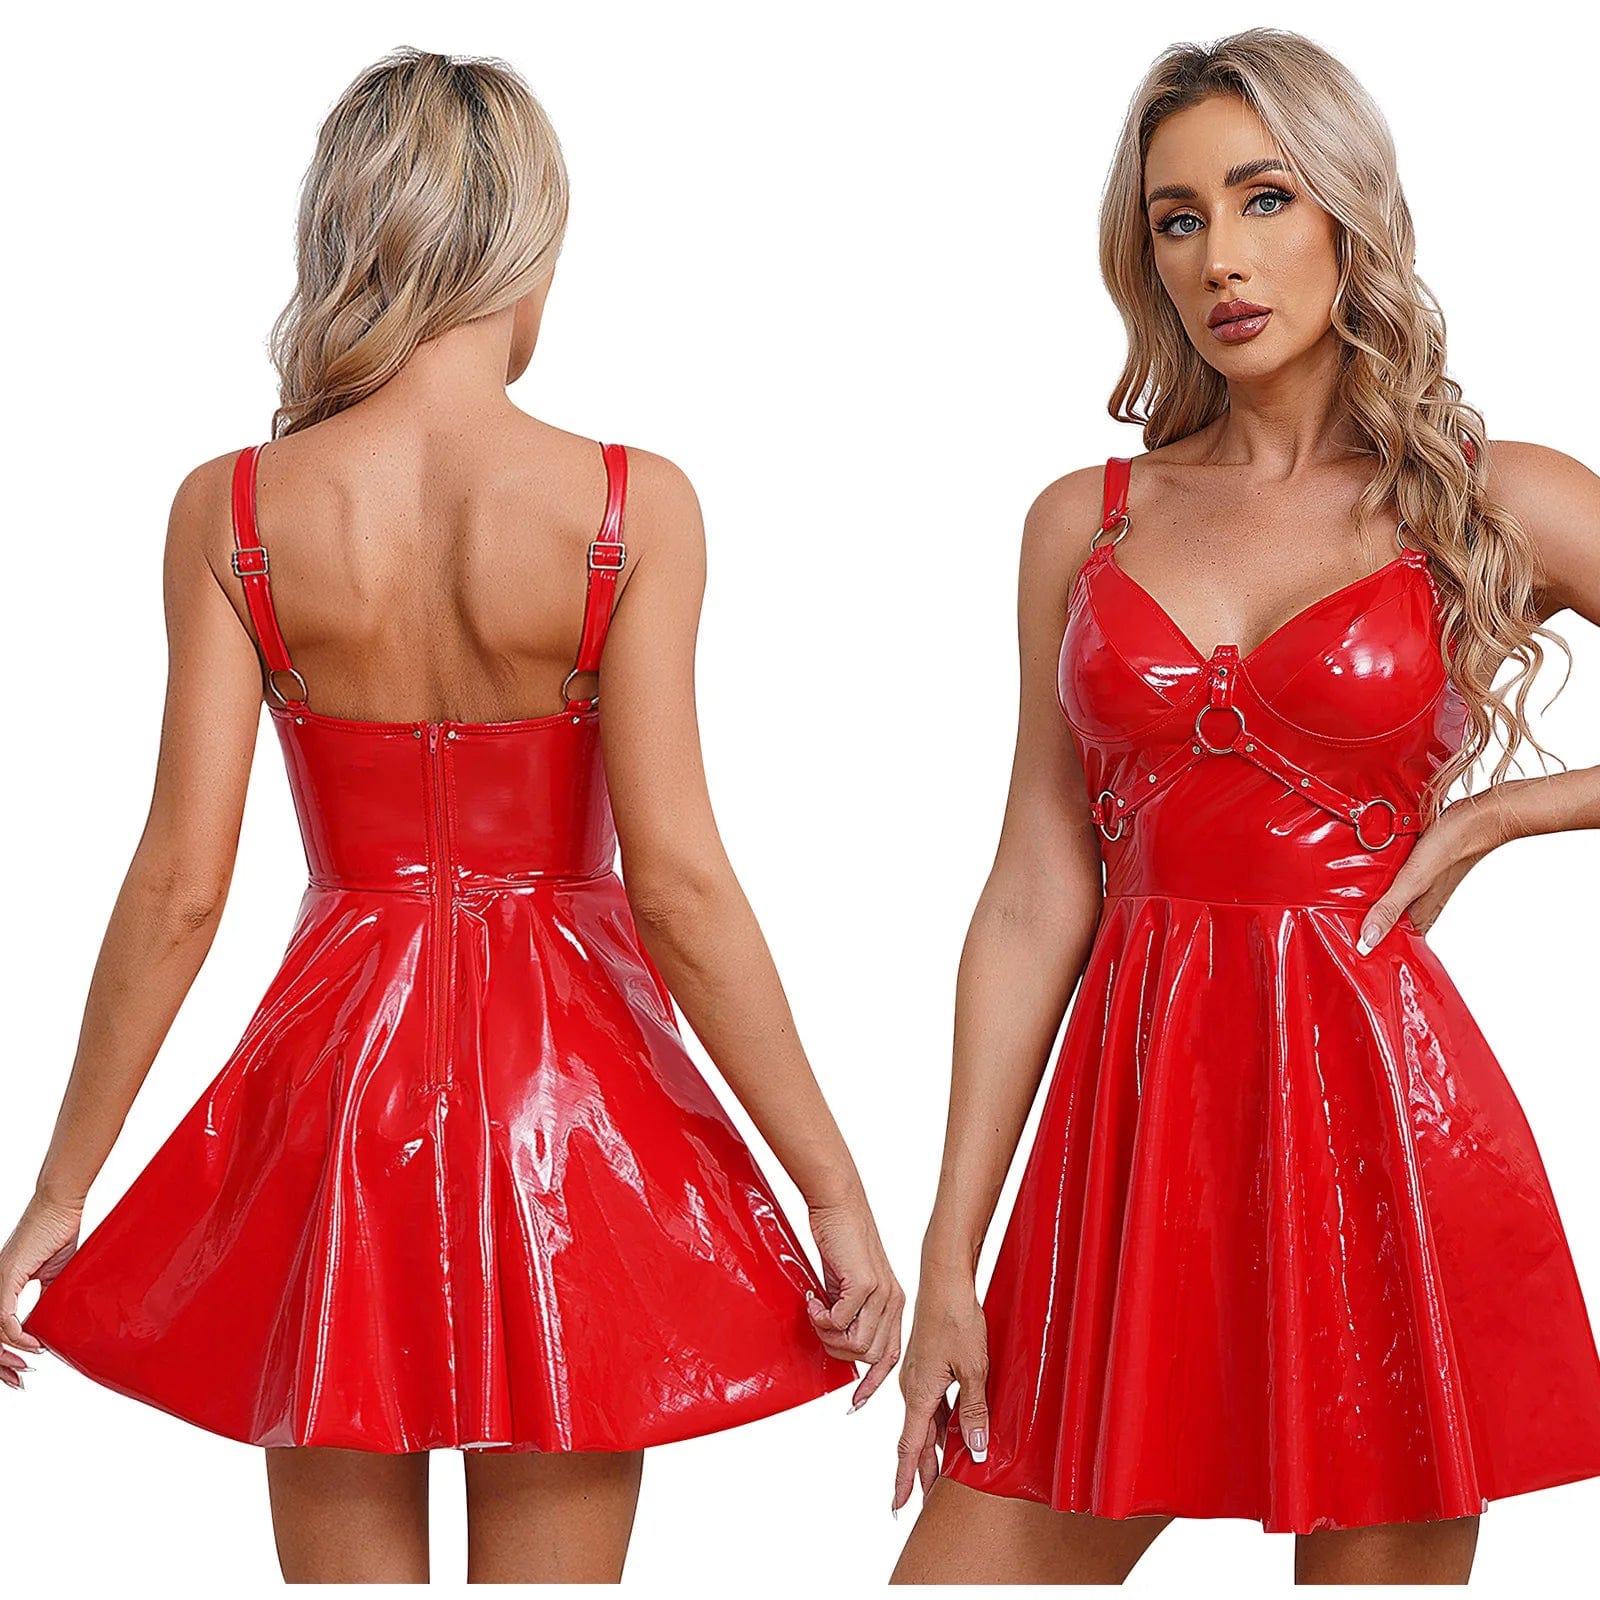 Kinky Cloth Red / S Wet Look O-Ring Strappy Dress